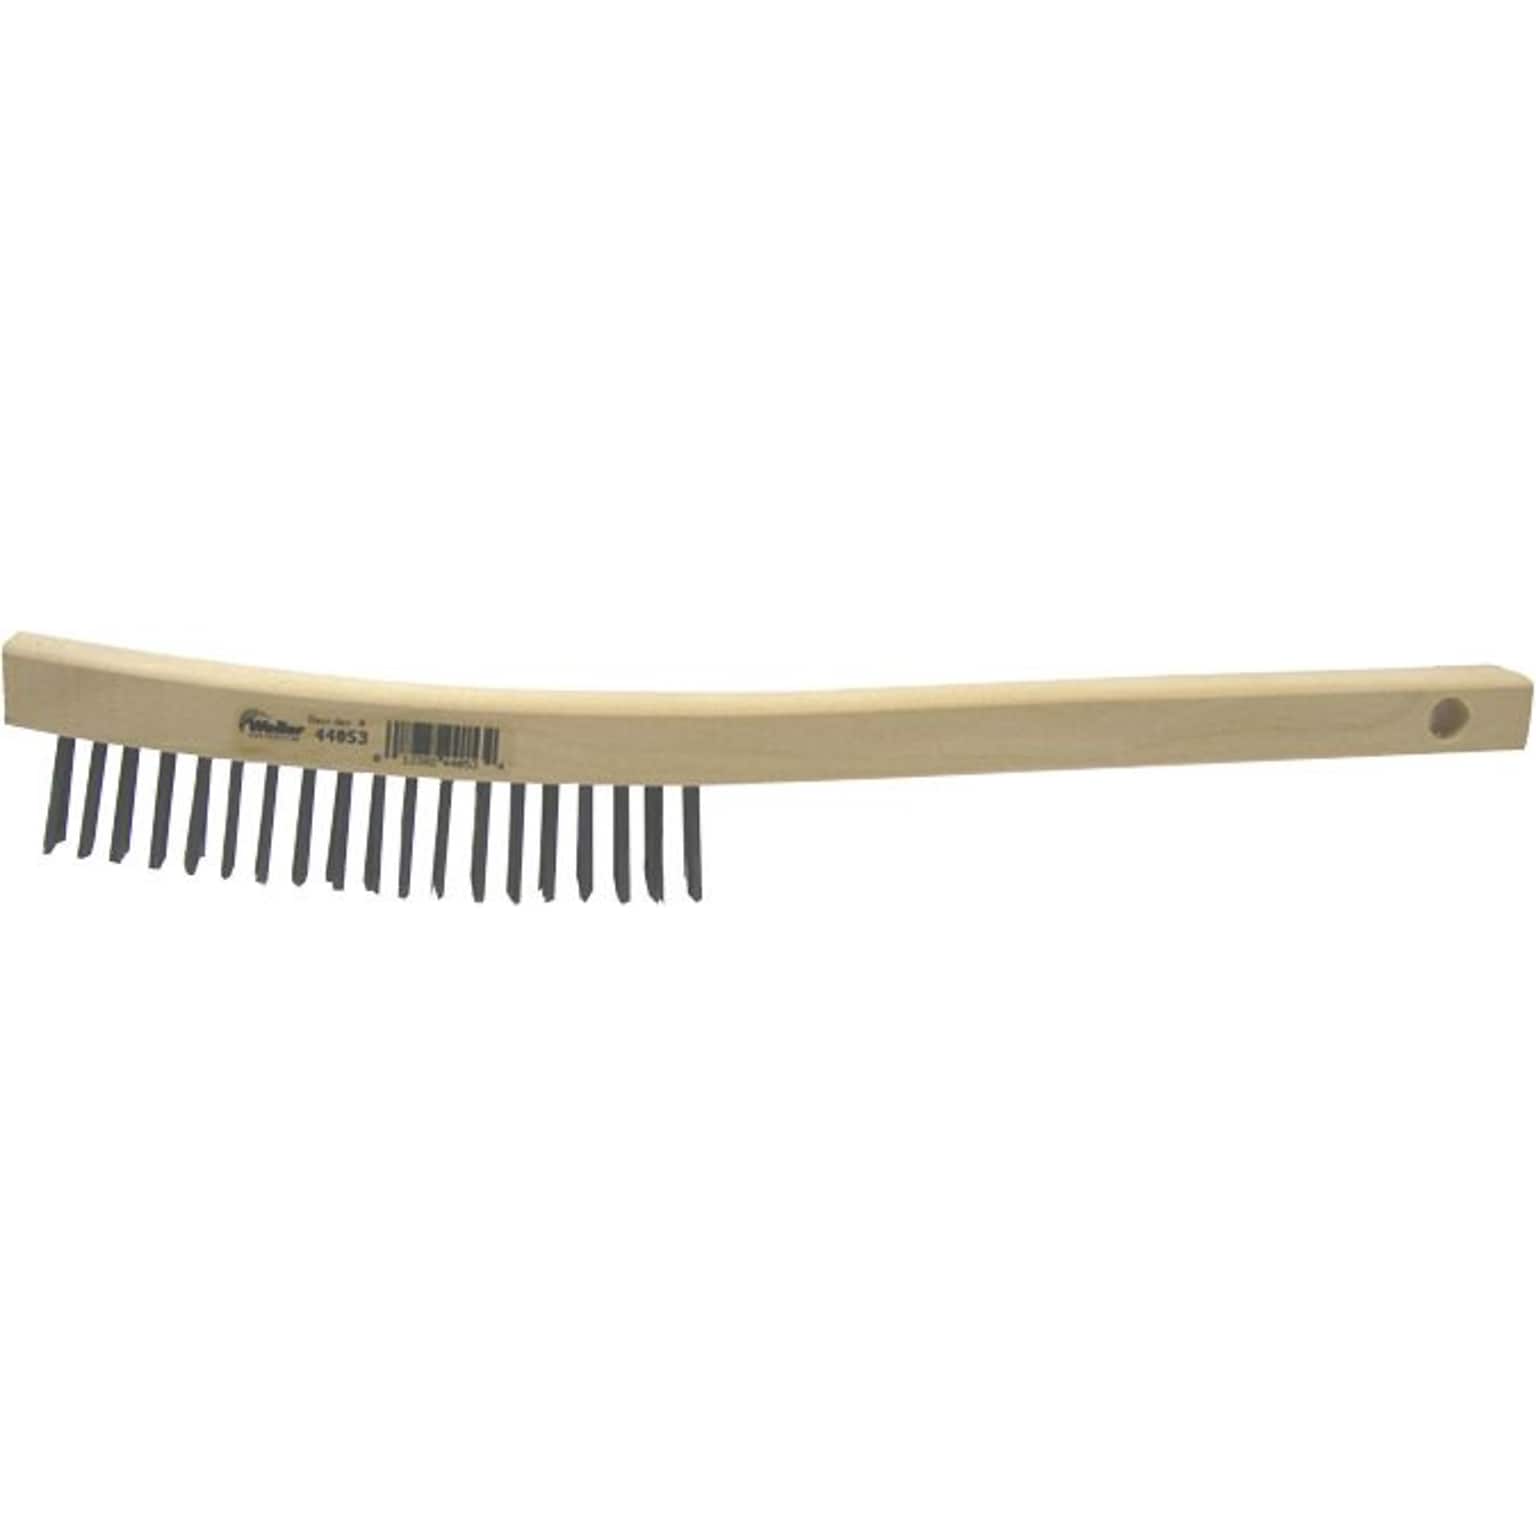 Weiler® Curved Handle Scratch Brushes, 14 Block, Stainless Steel Bristles